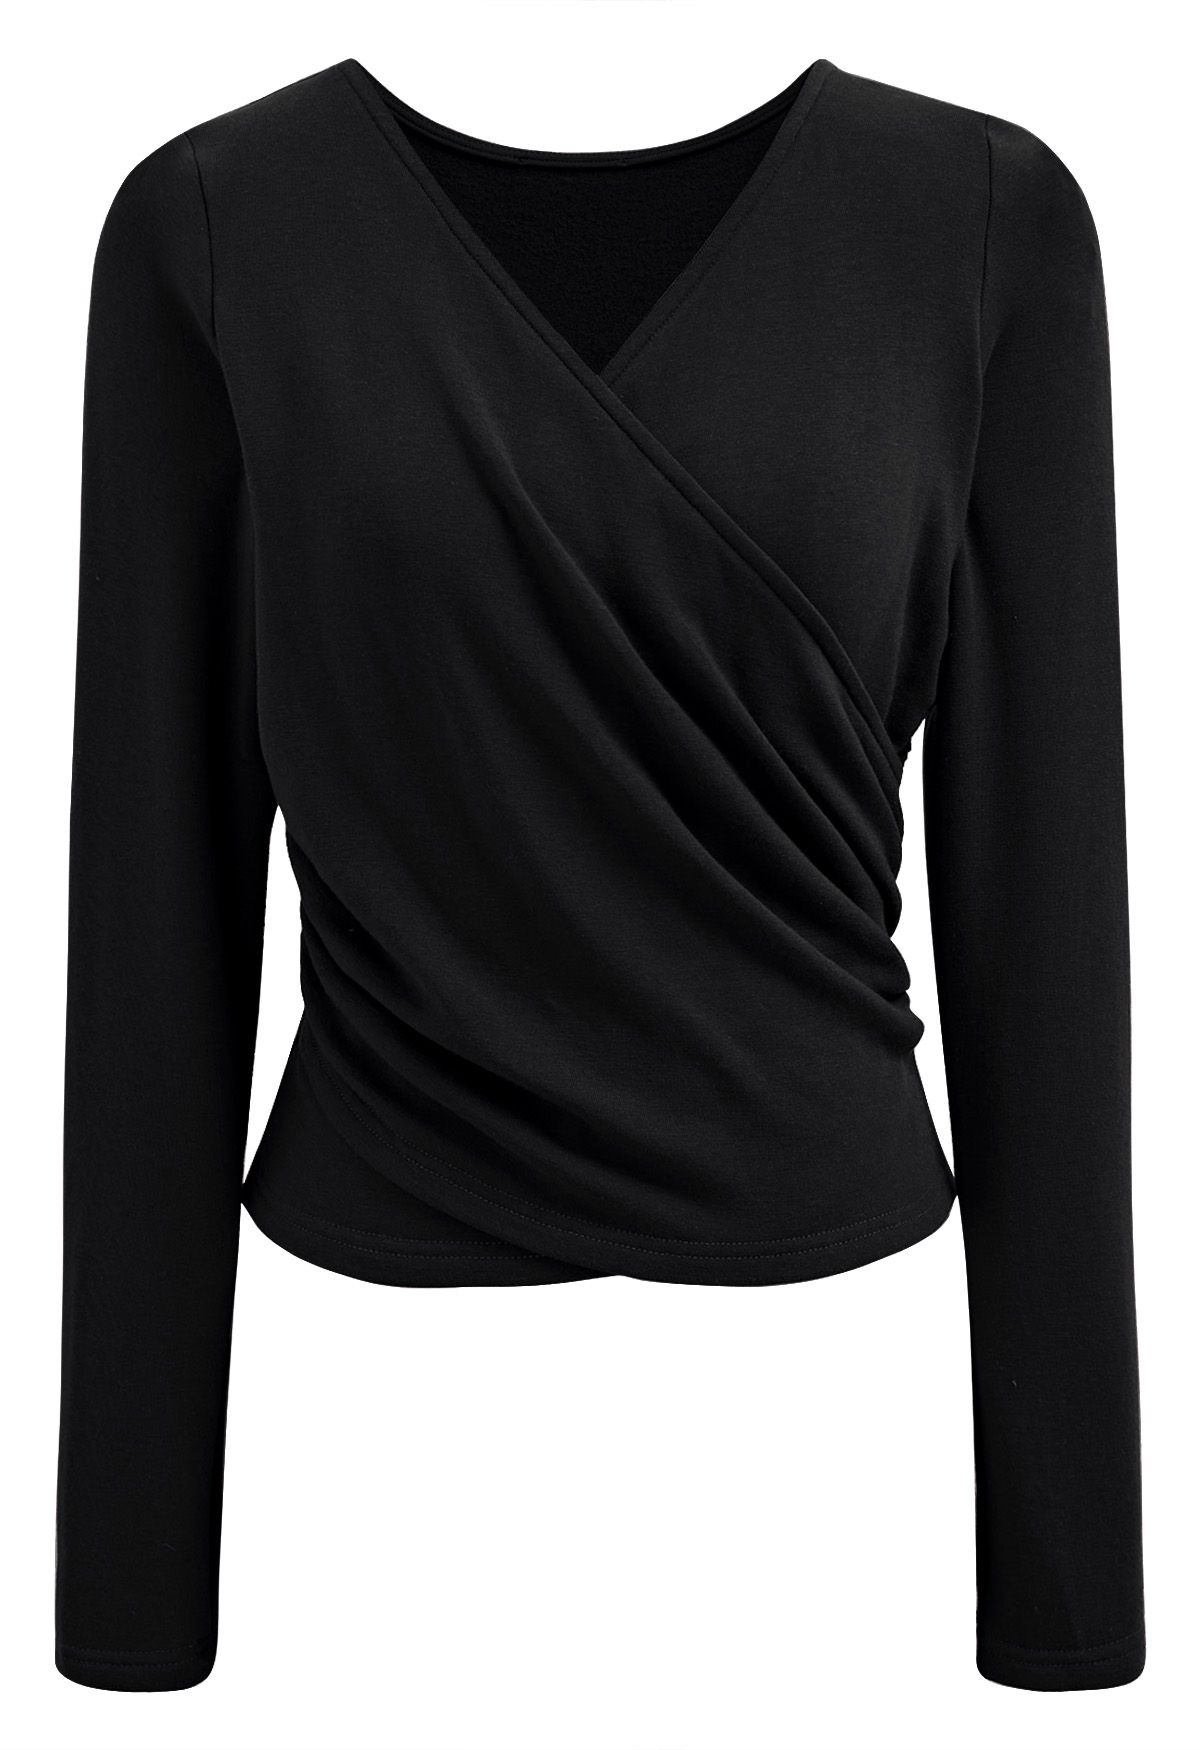 Cross V-Neck Long Sleeves Top in Black - Retro, Indie and Unique Fashion